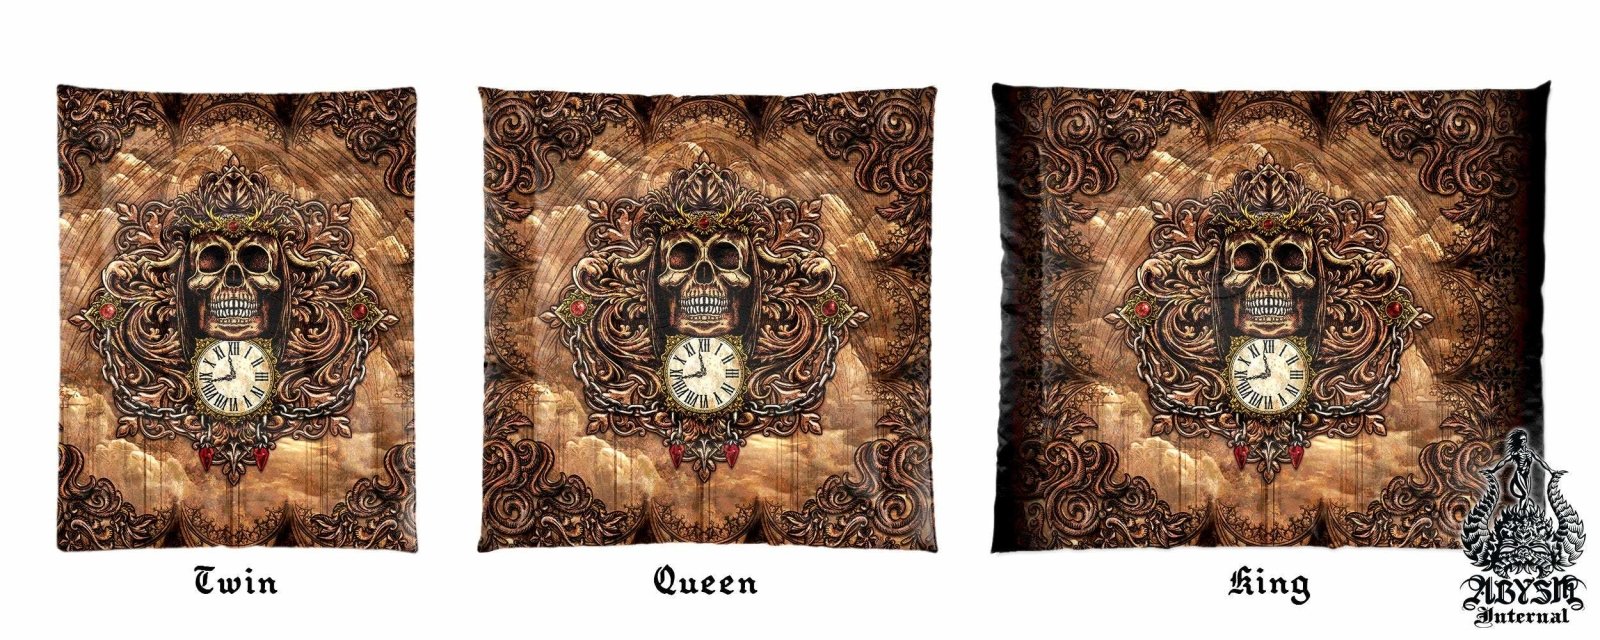 Grim Reaper Bedding Set, Comforter and Duvet, Horror Art, Gothic Bed Cover and Bedroom Decor, King, Queen and Twin Size - Beige - Abysm Internal